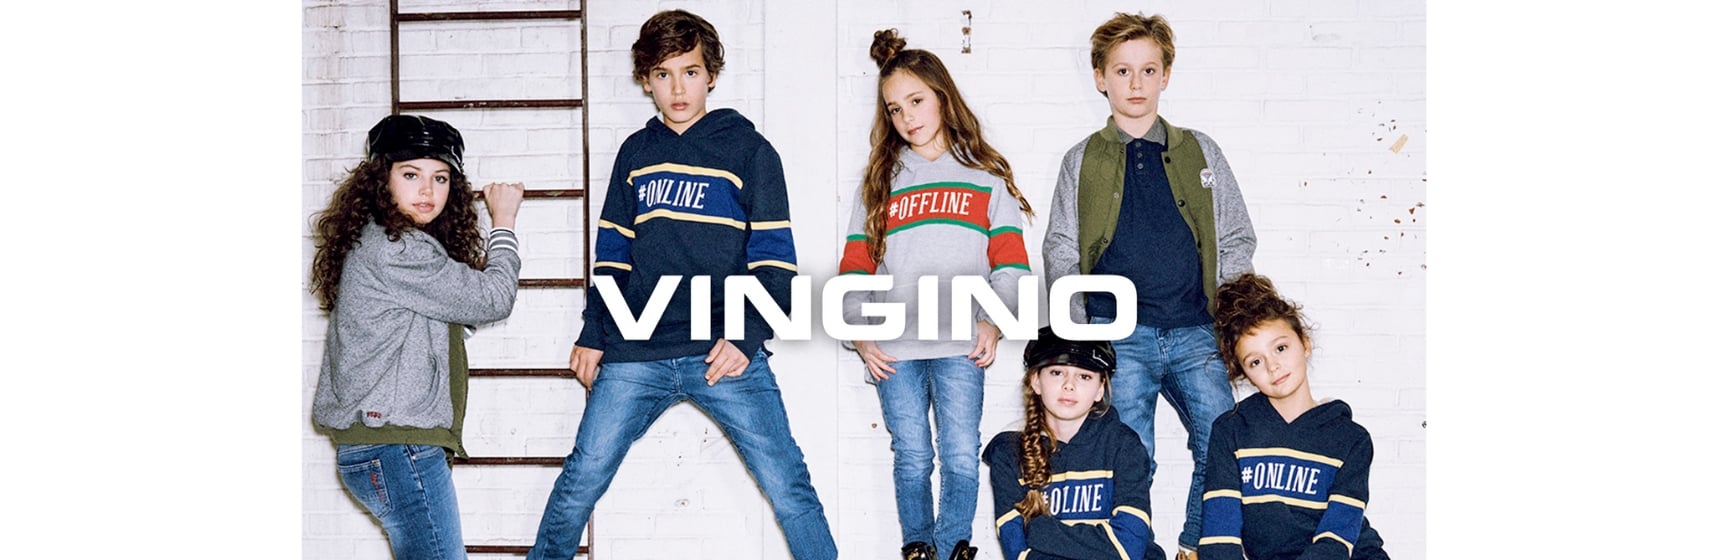 Vingino Kids Jeans keeps data in one place with Delogue PLM